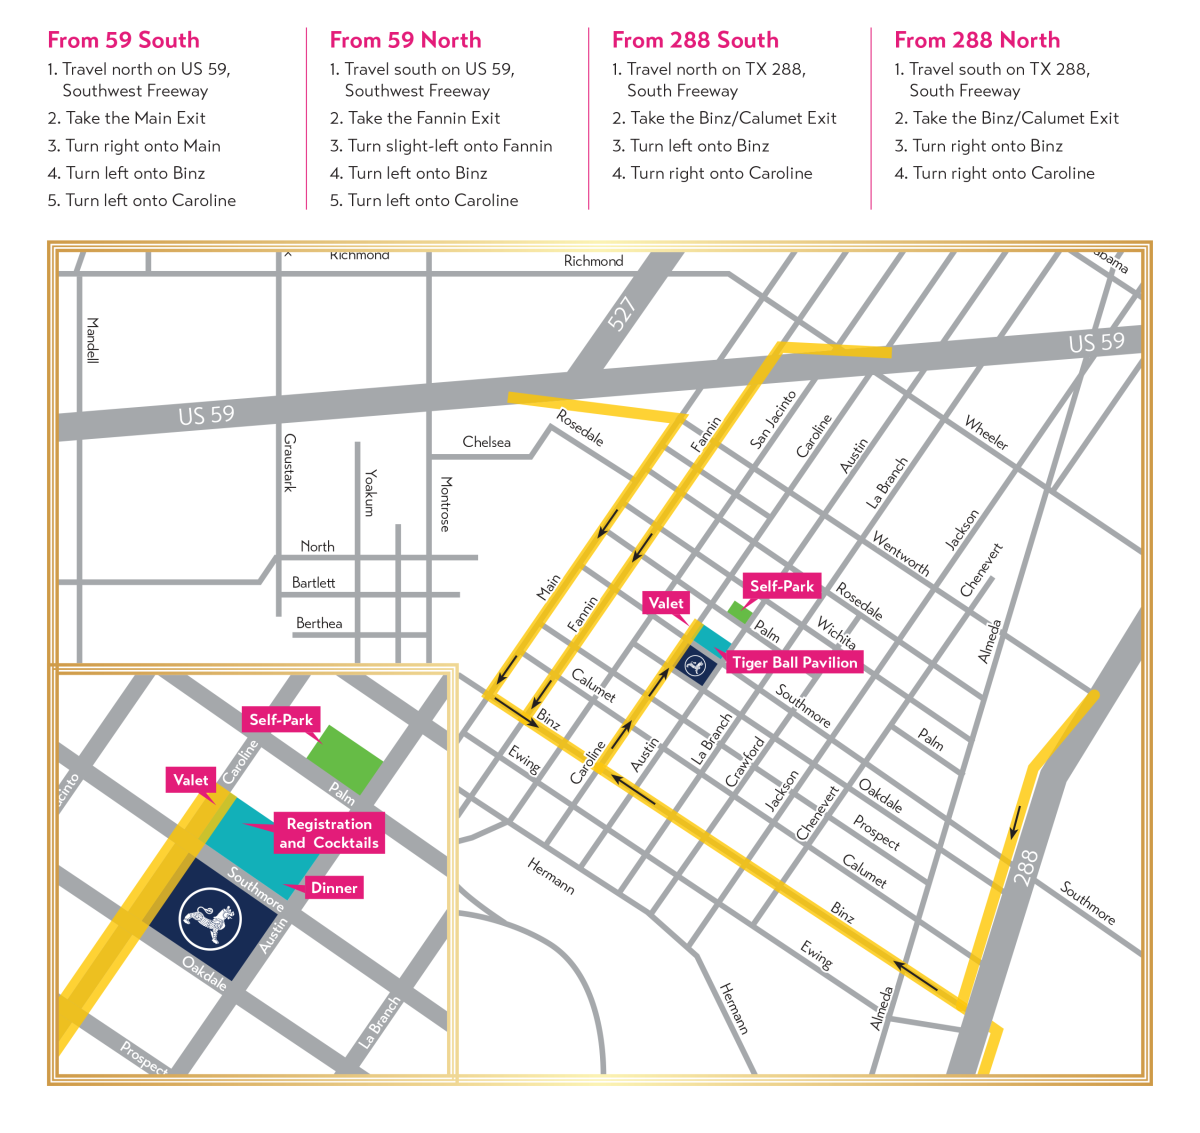 Tiger Ball 2022 valet and self-park map